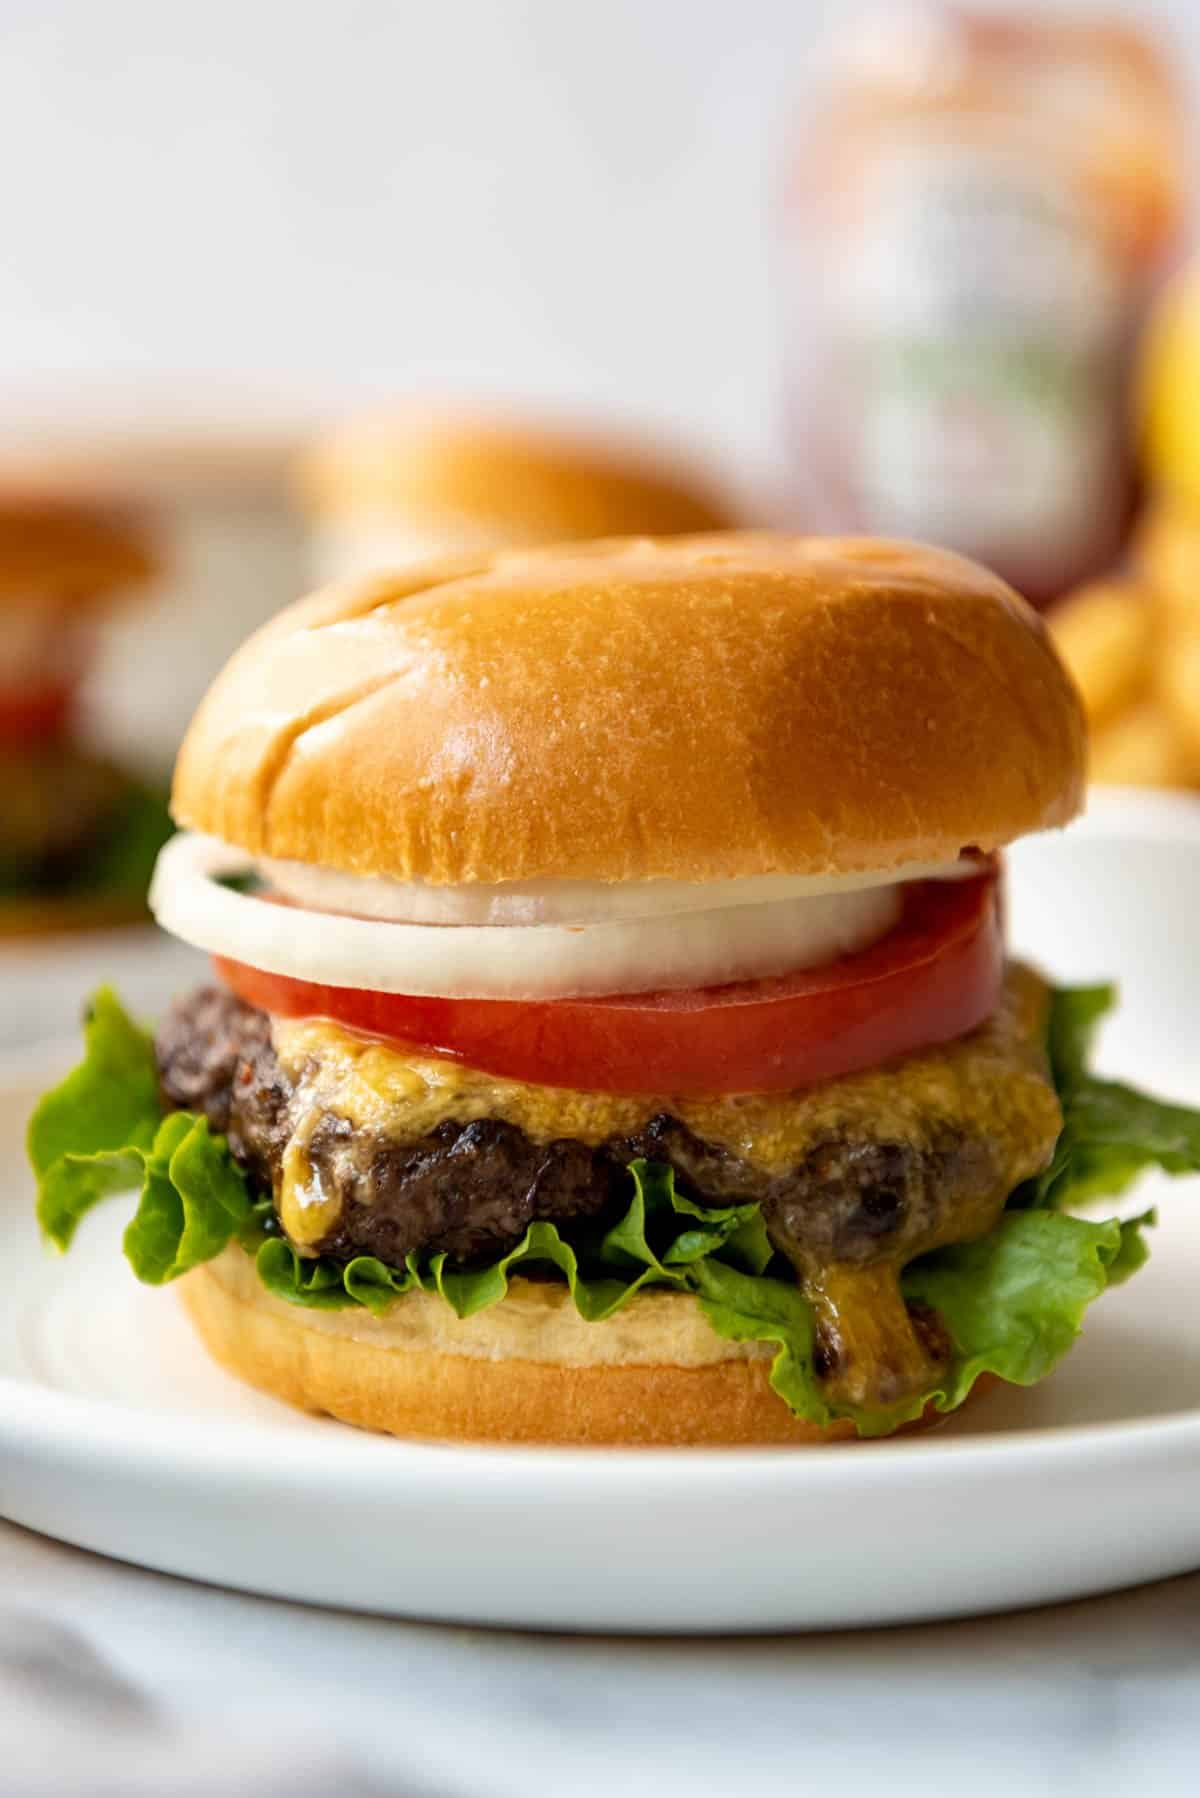 A juicy air fryer hamburger with all the fixings.